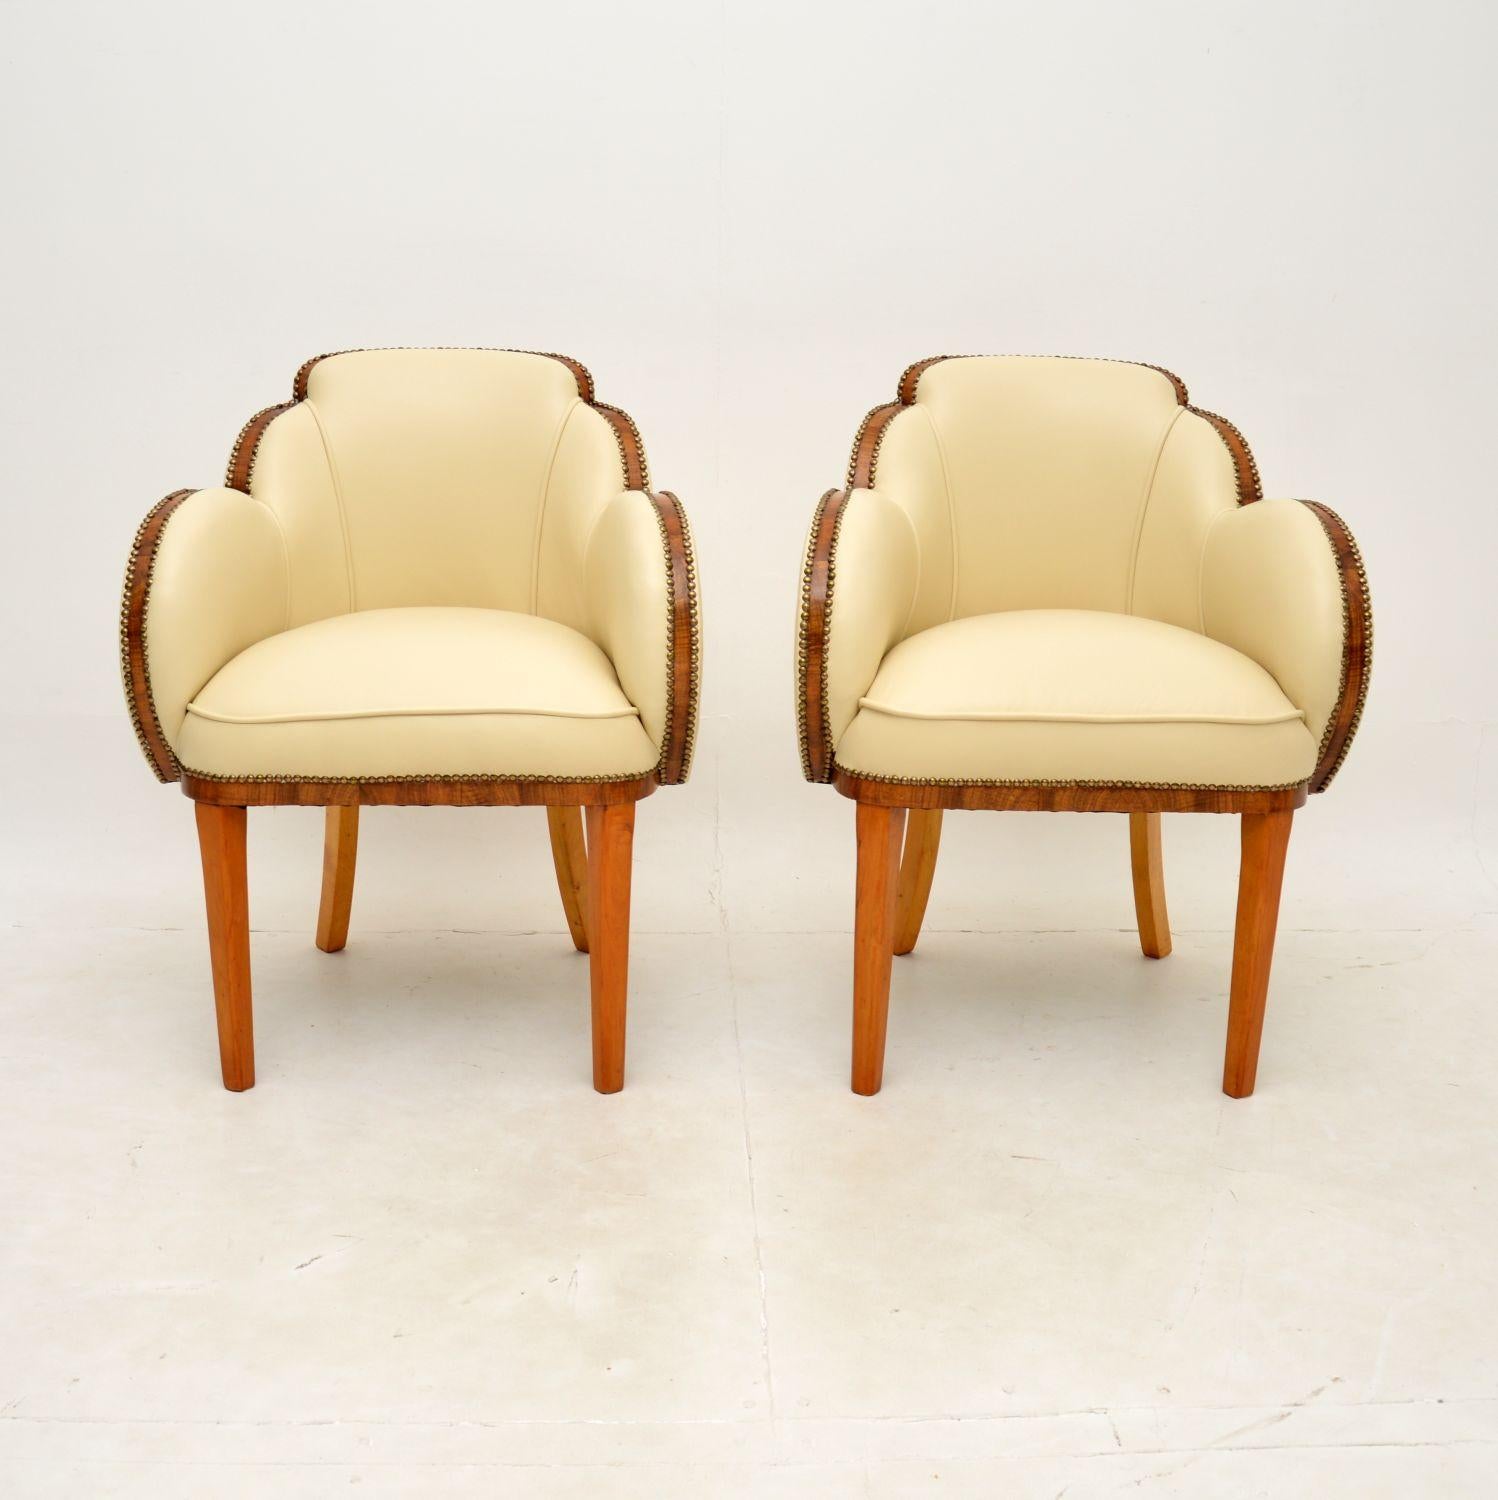 A fantastic pair of Art Deco walnut and Leather cloud back armchairs by Epstein. They were made in England, they date from the 1920-30’s.

The quality is outstanding, they are beautifully designed with cloud shaped backs, walnut banding around the